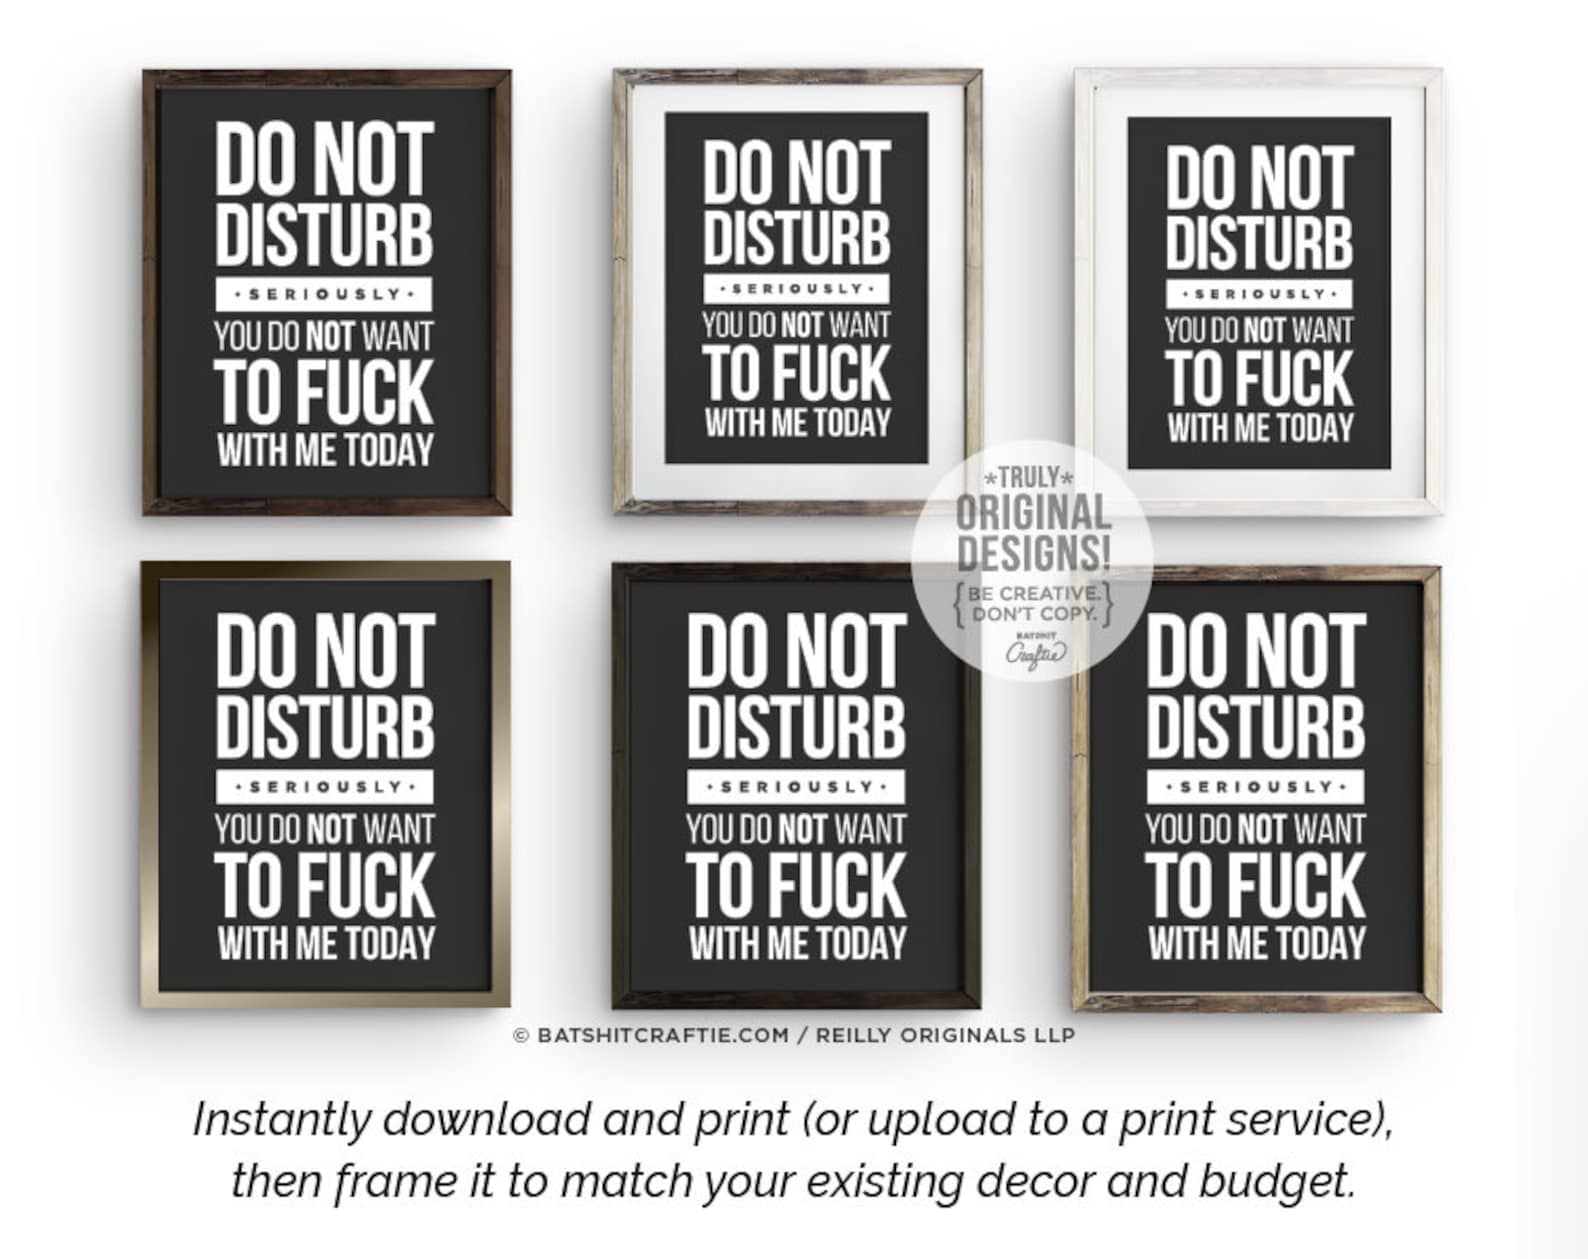 Funny Do Not Disturb Sign Printable Seriously Office Workplace Etsy